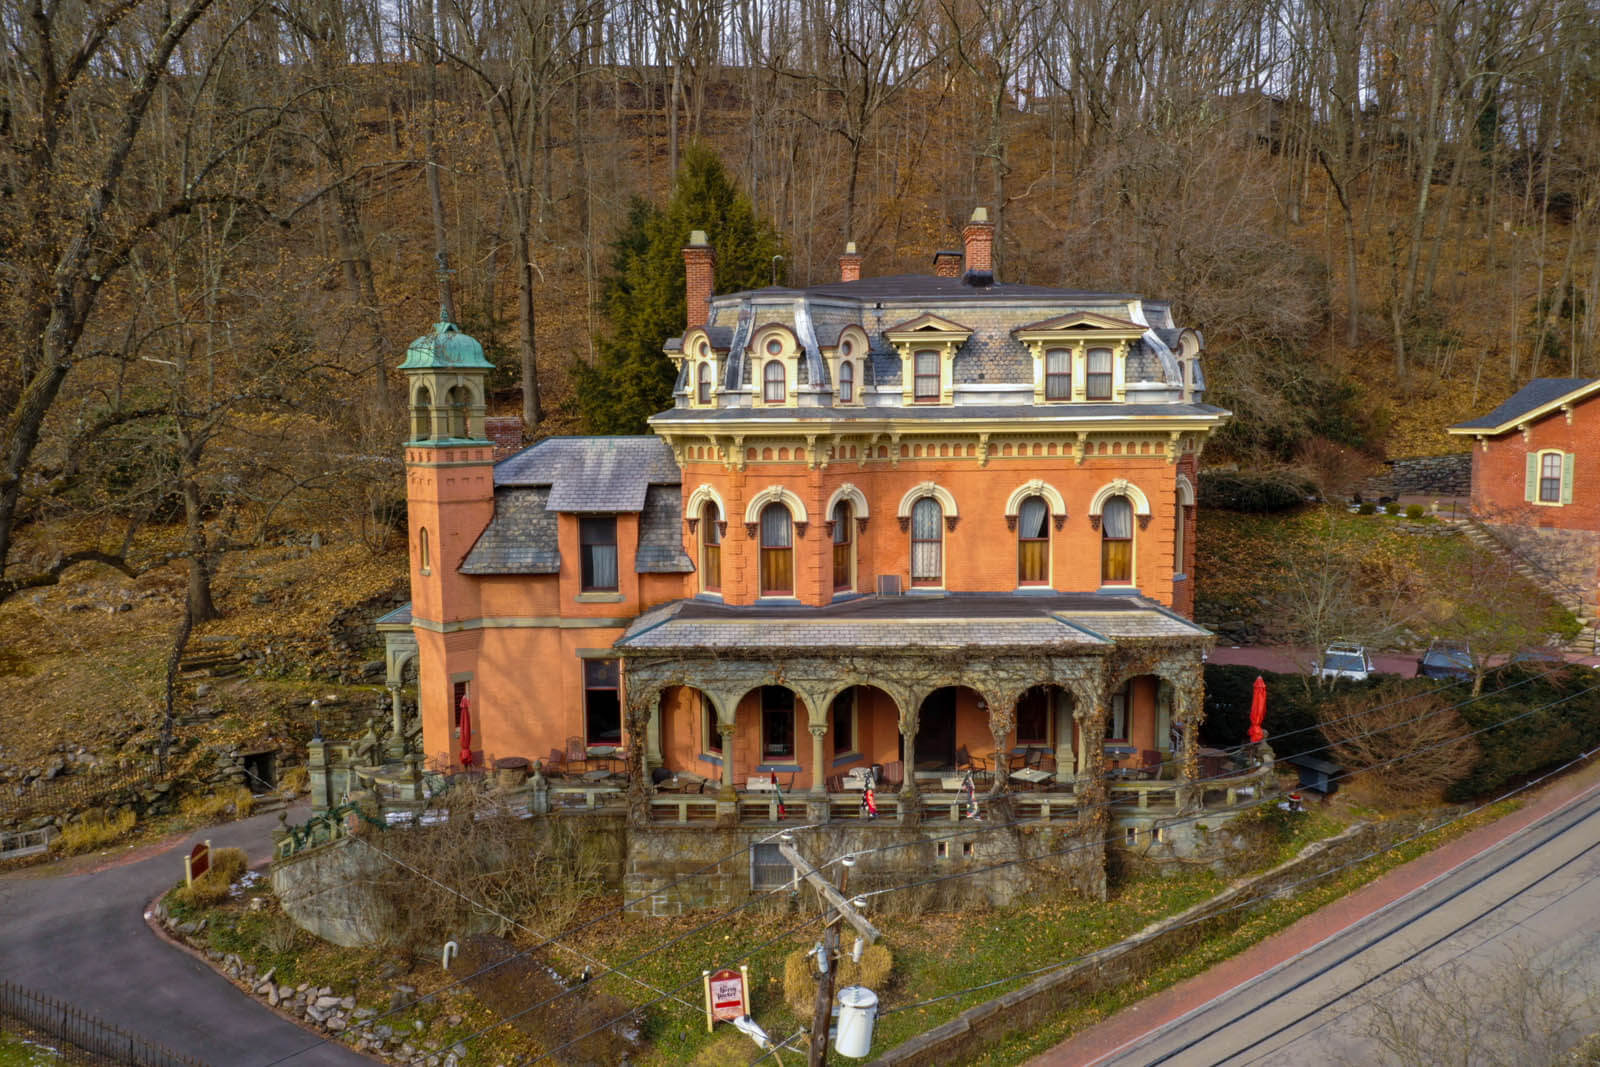 Harry Packer Mansion in Jim Thorpe PA